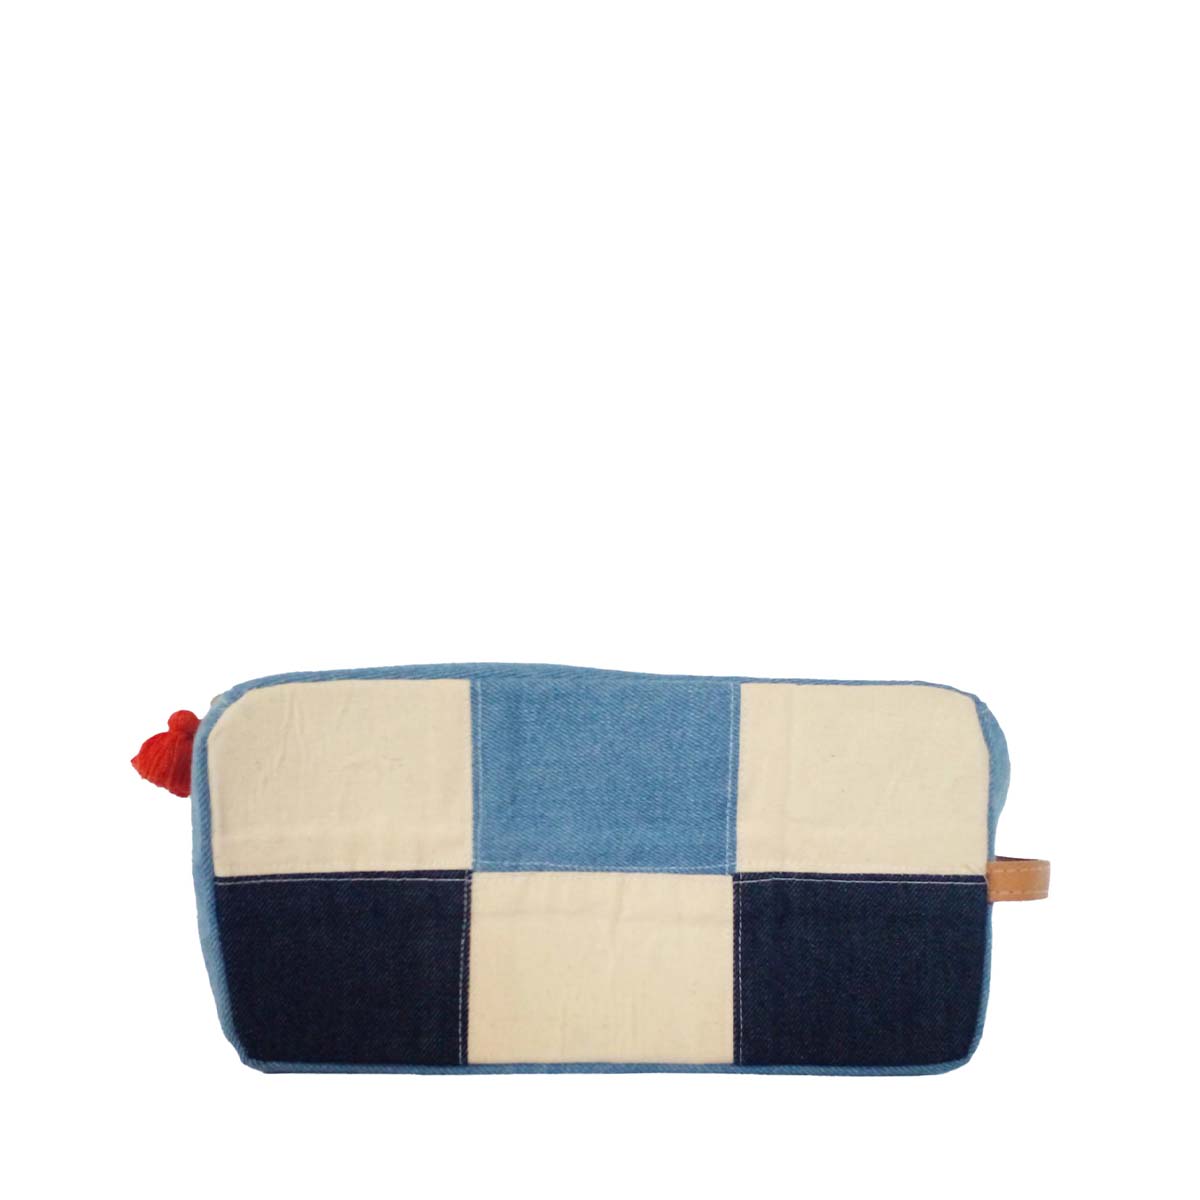 The front of the hand woven artisan Edna Dopp Kit in 90s Denim. It has a flat short rectangular shape. The pattern has a light and dark wash denim checkerboard squares. It has a red mini tassel and a leather handle on the side. 